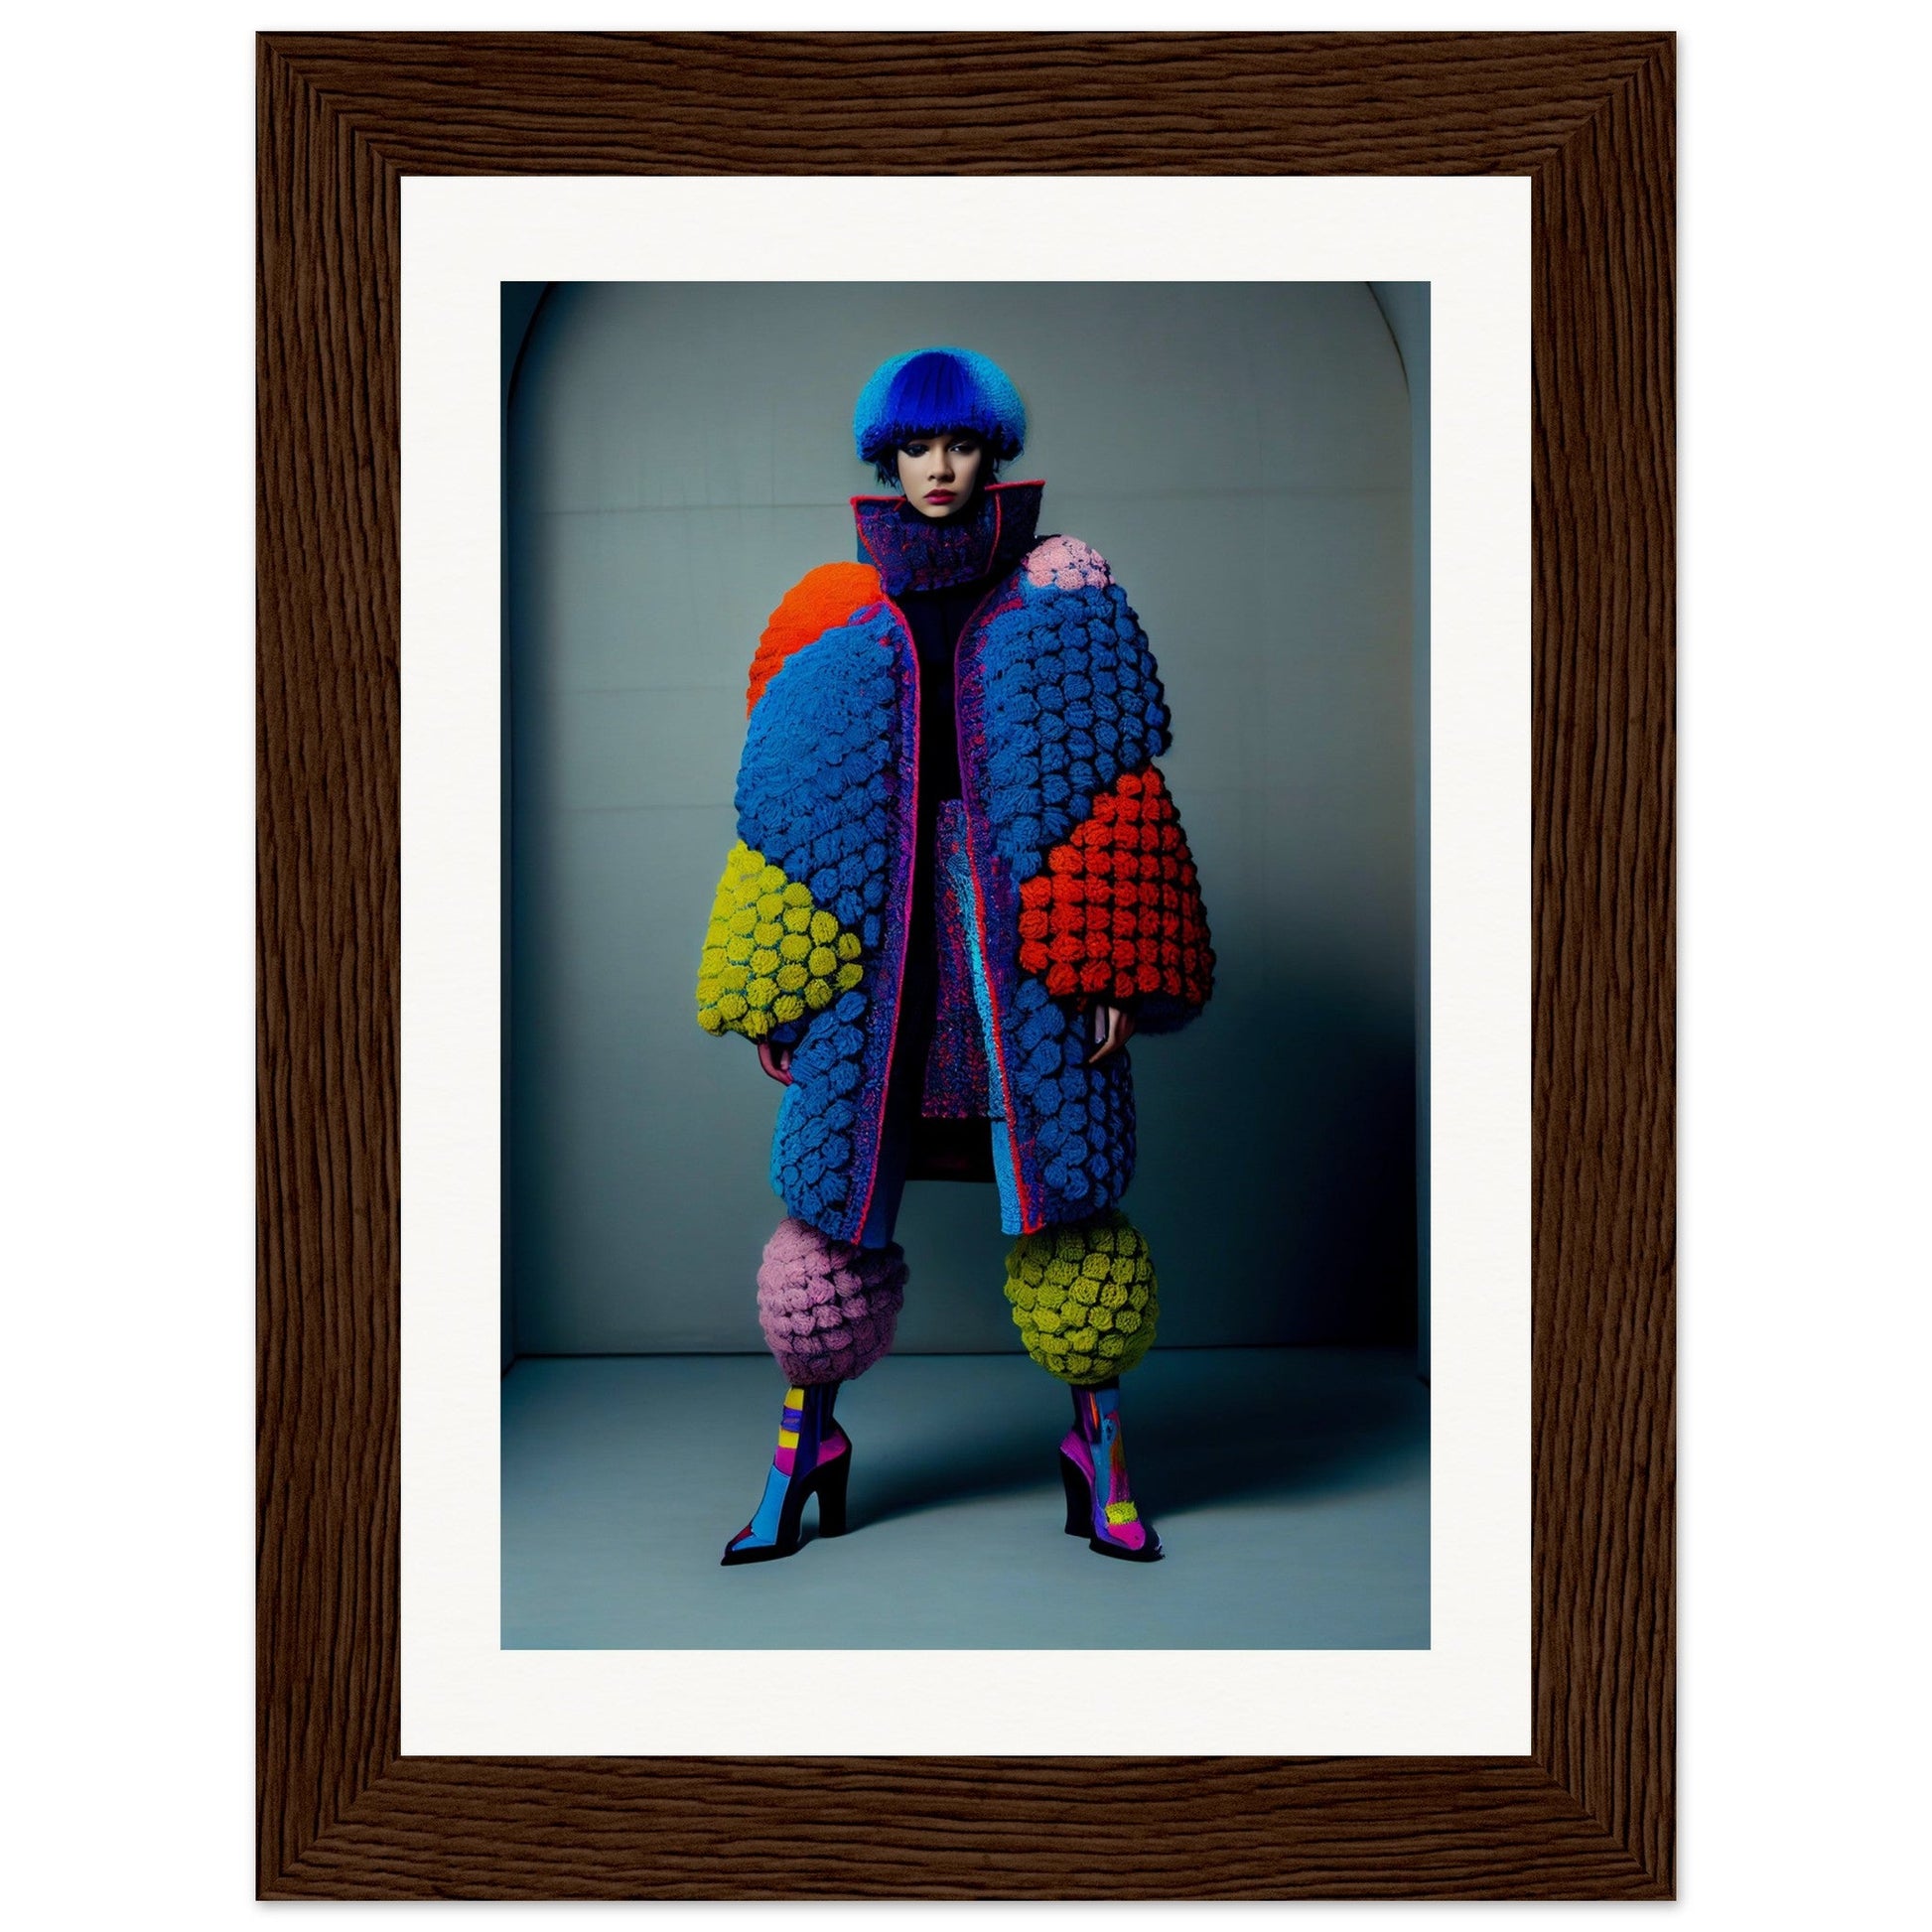 A woman in a colorful coat is standing in front of a black frame, showcasing the Crochet Addicts Anonymous The Oracle Windows™ Collection.